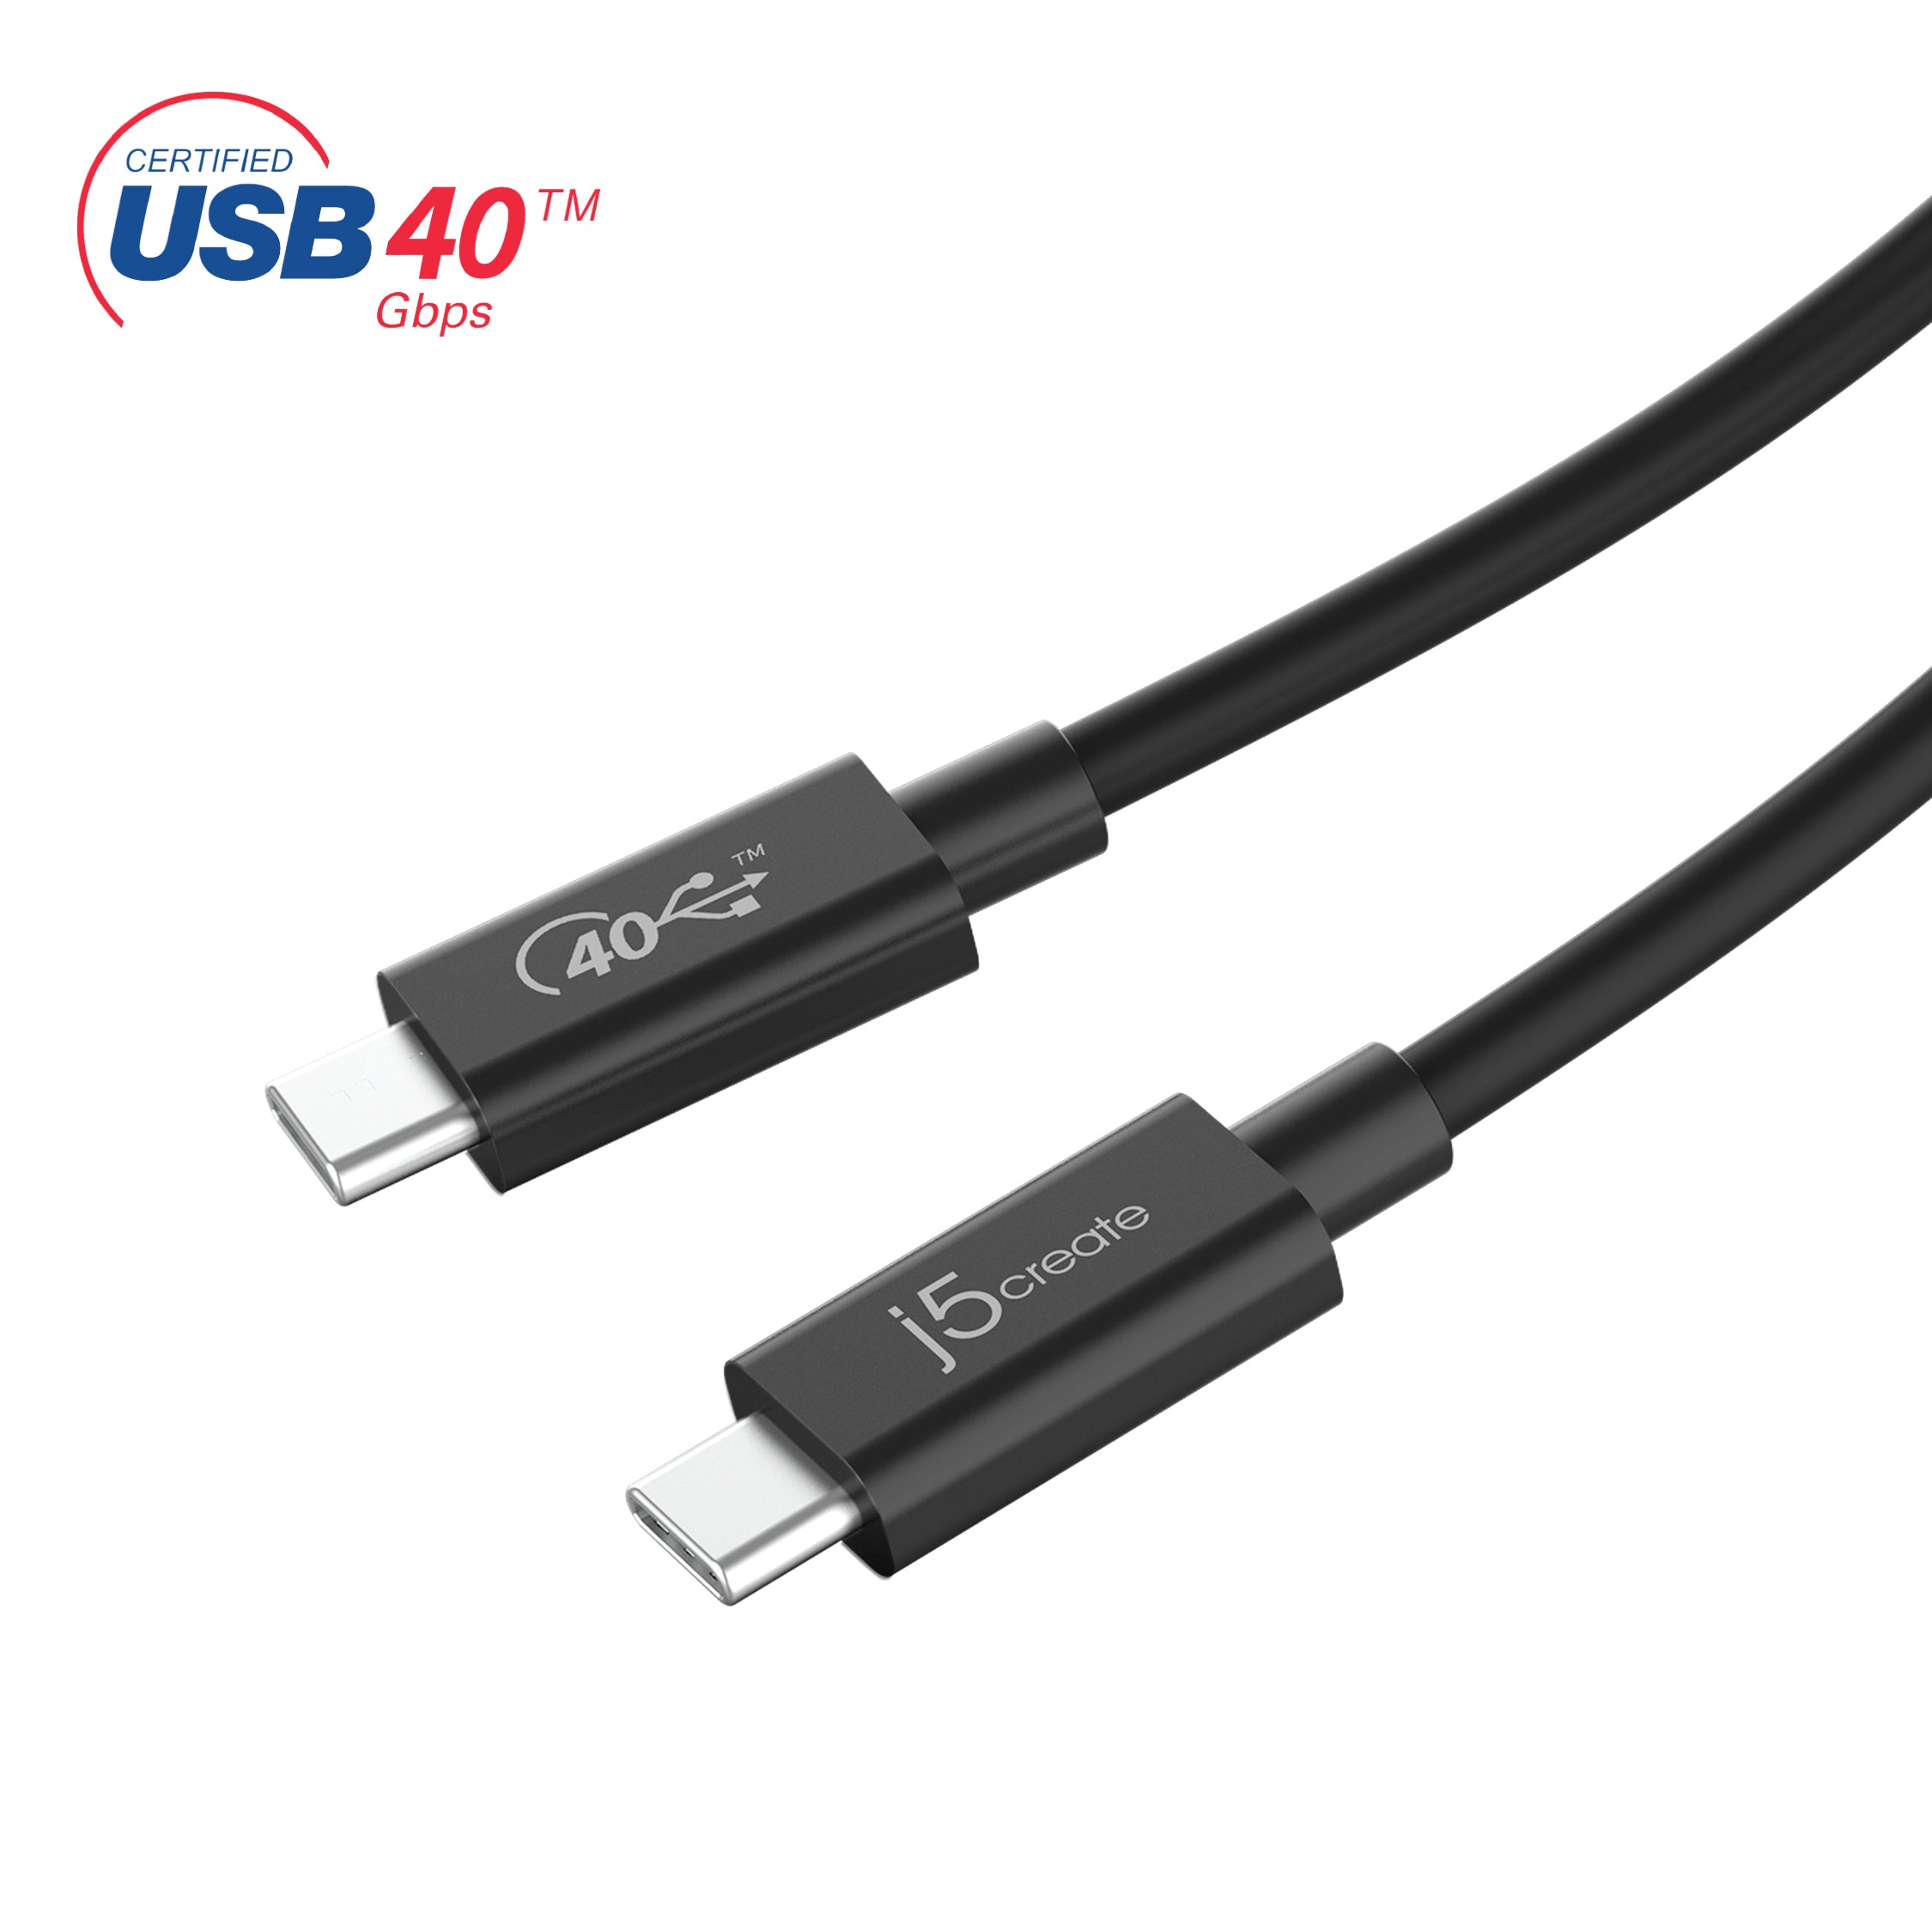 40 male USB to male USBC Phone Charging Cable